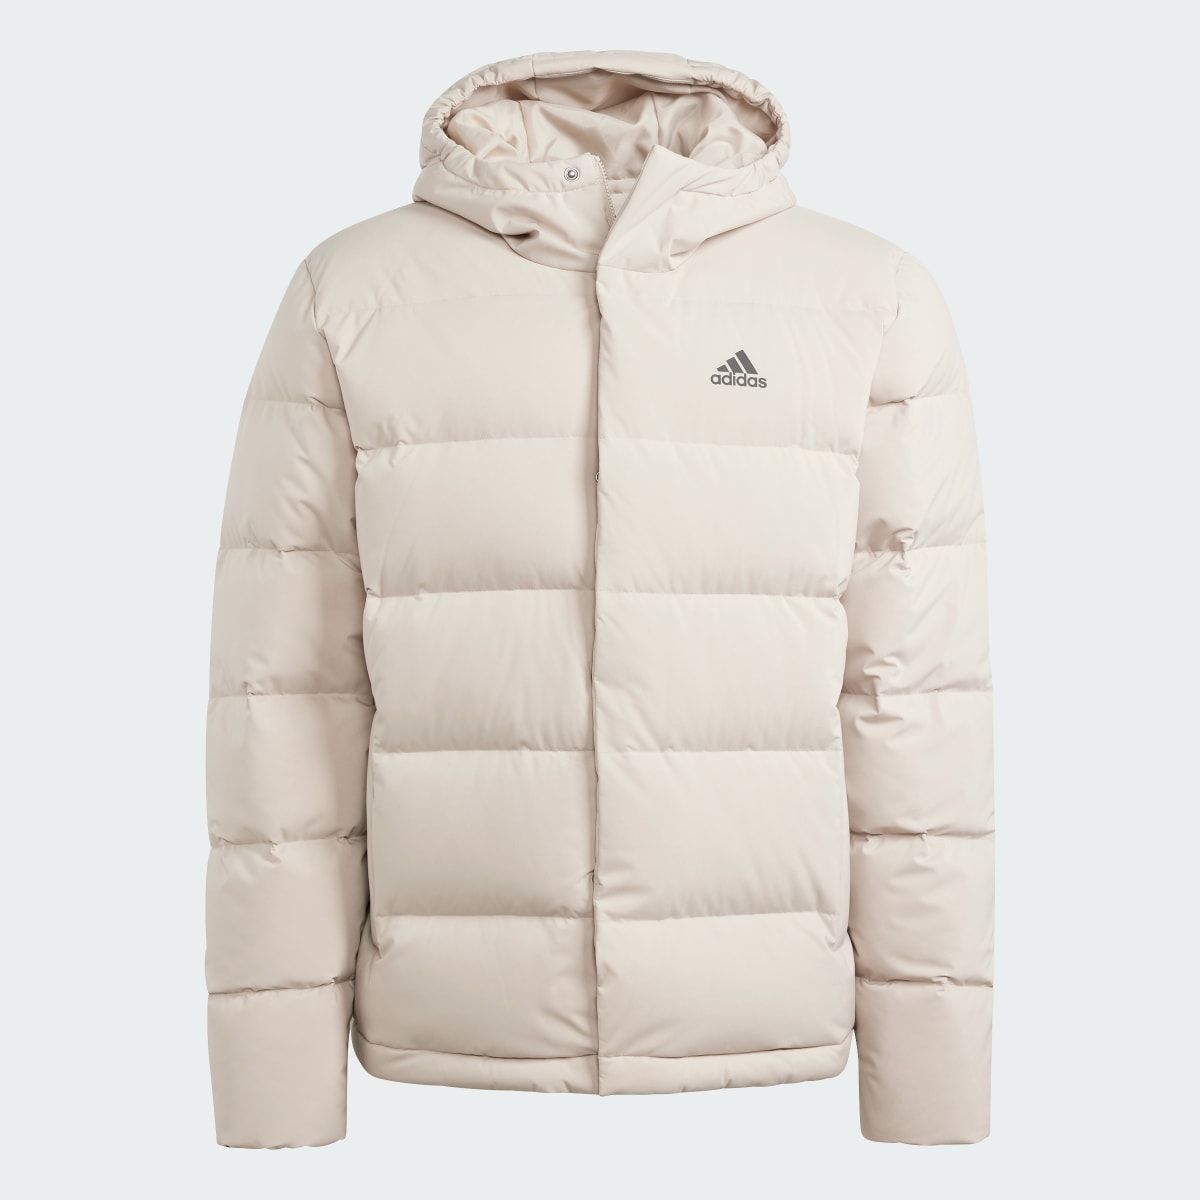 Adidas Helionic Hooded Down Mont. 5